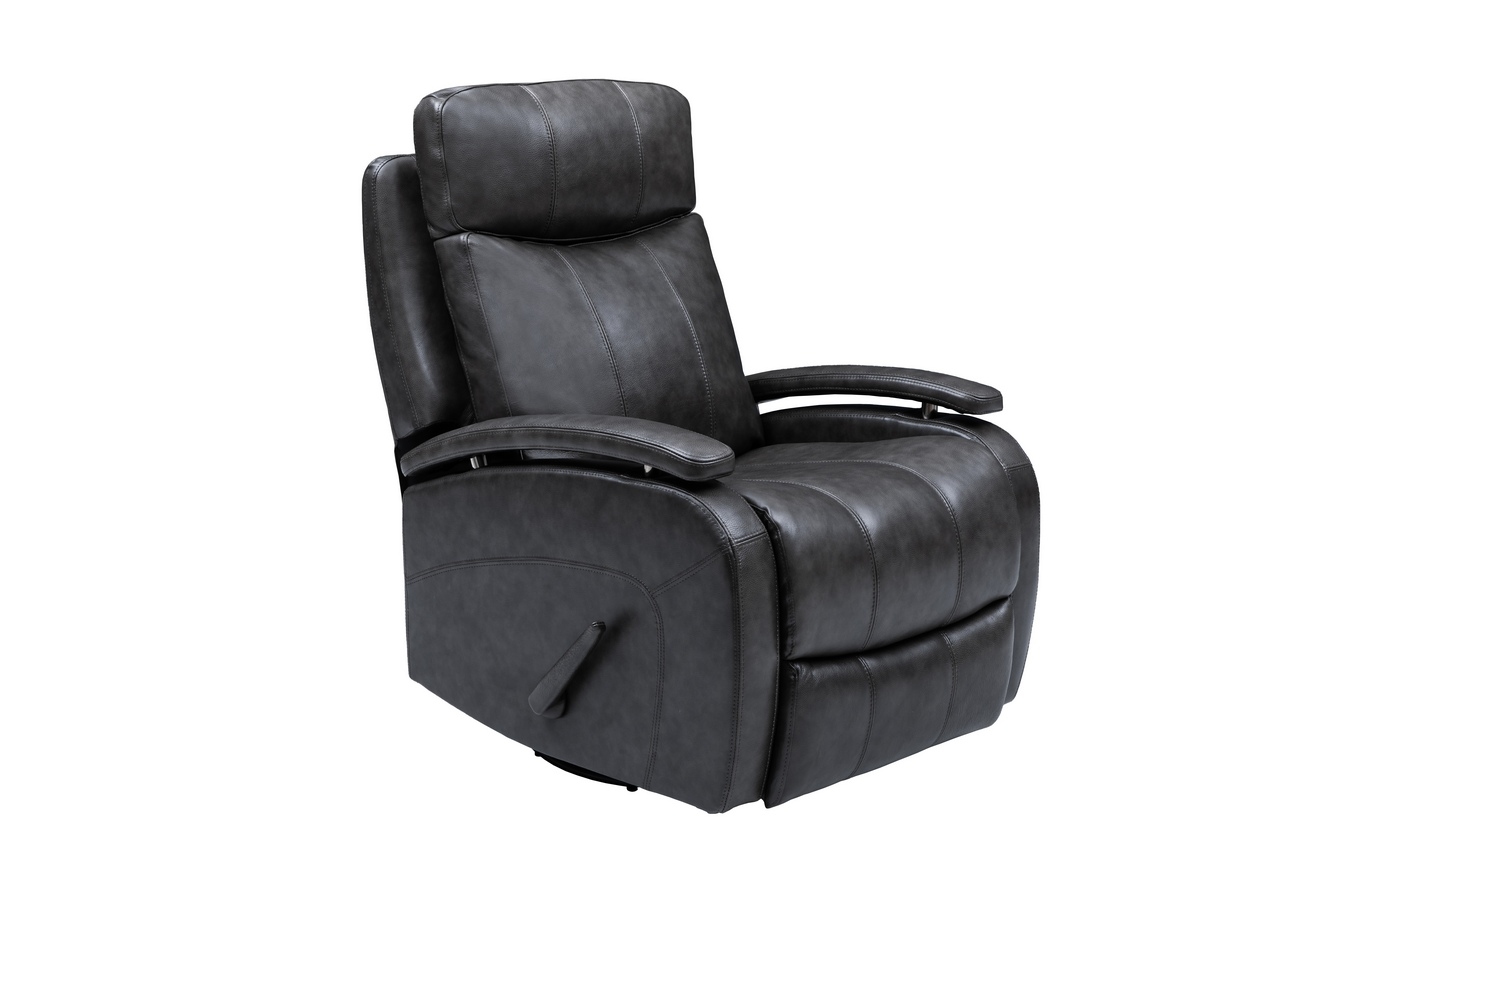 Barcalounger Duffy Swivel Glider Recliner Chair - Ryegate Gray/Leather match